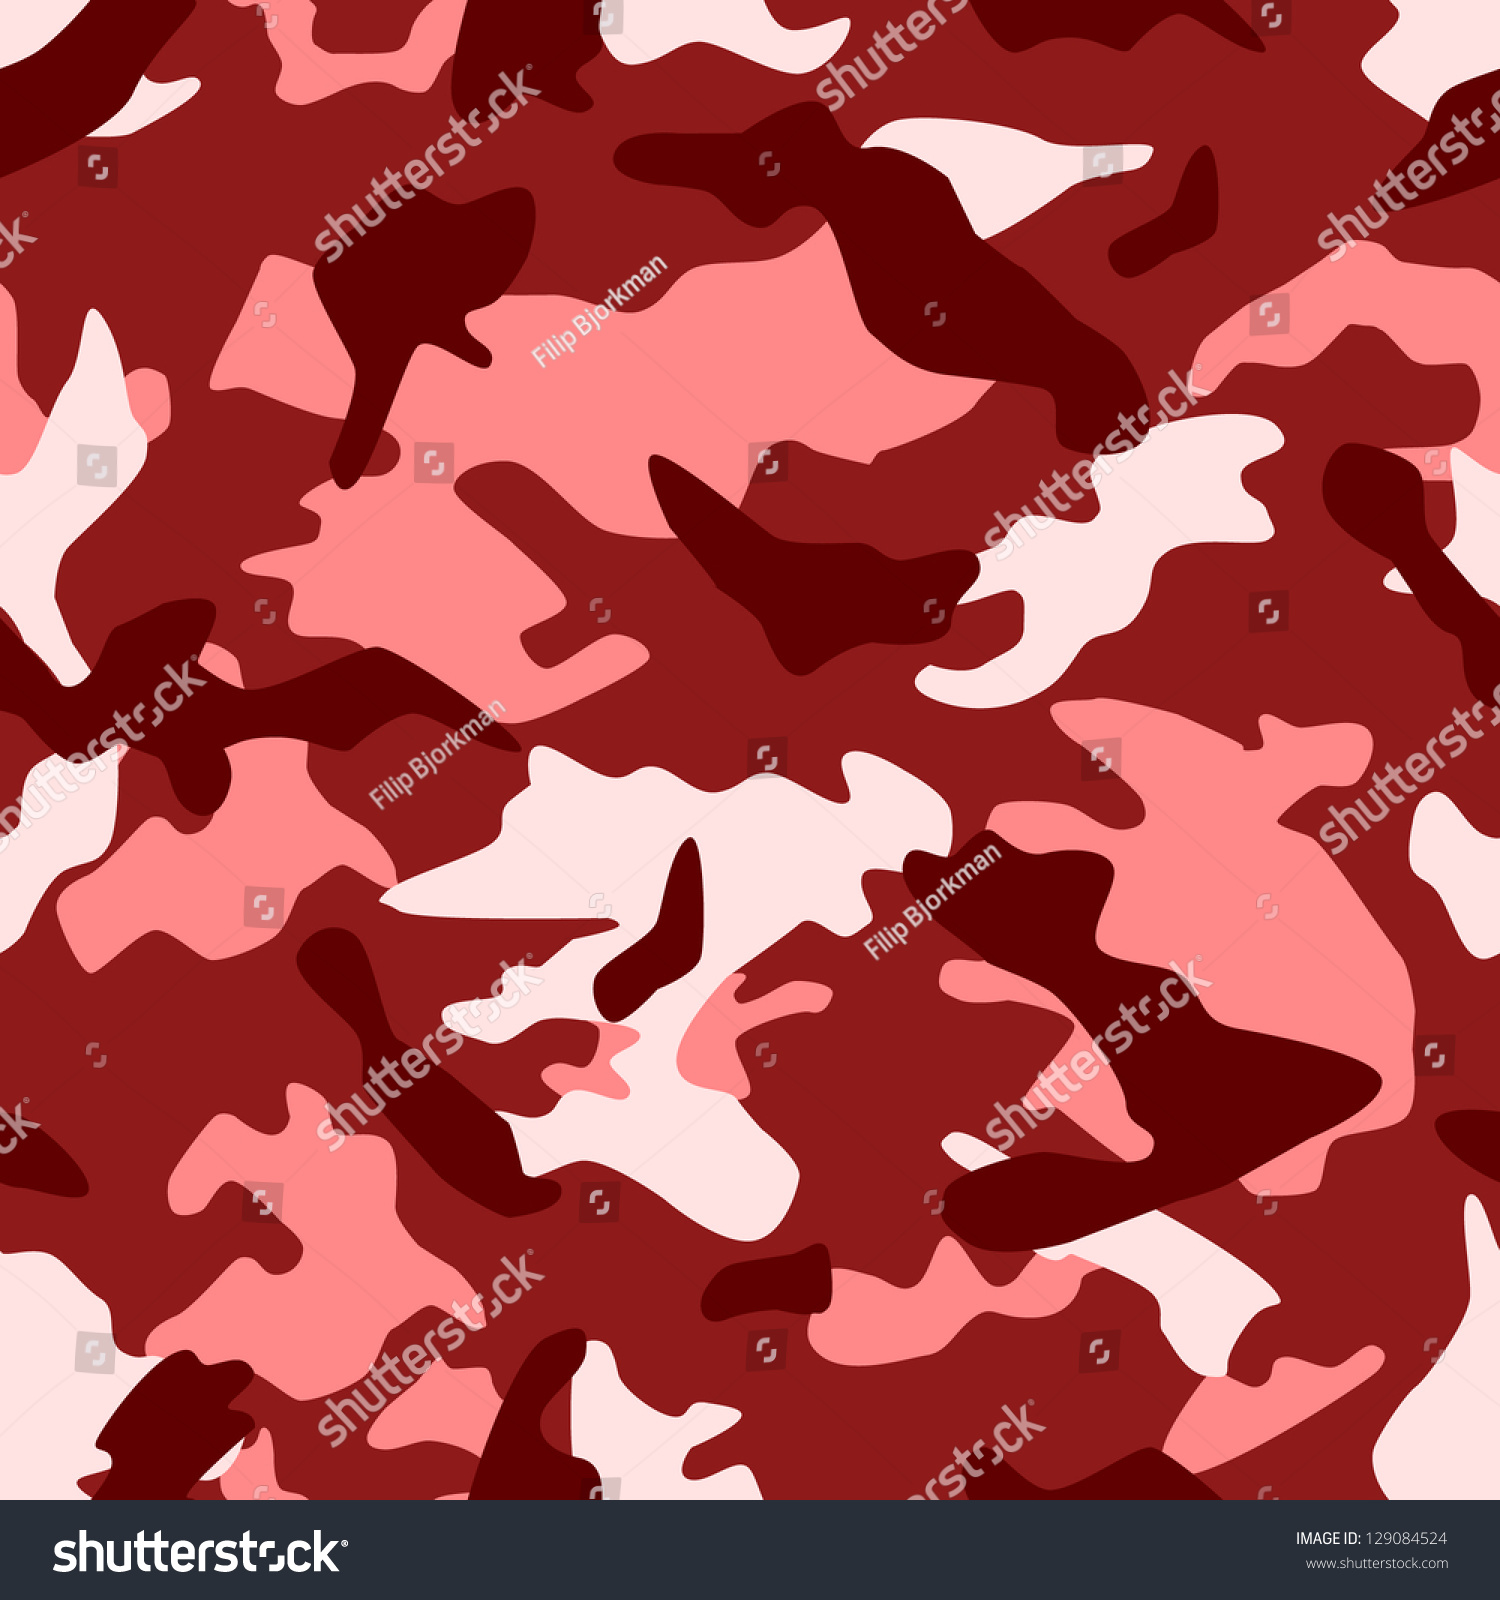 Seamless Vector Square Camouflage Series Red Stock Vector 129084524 ...